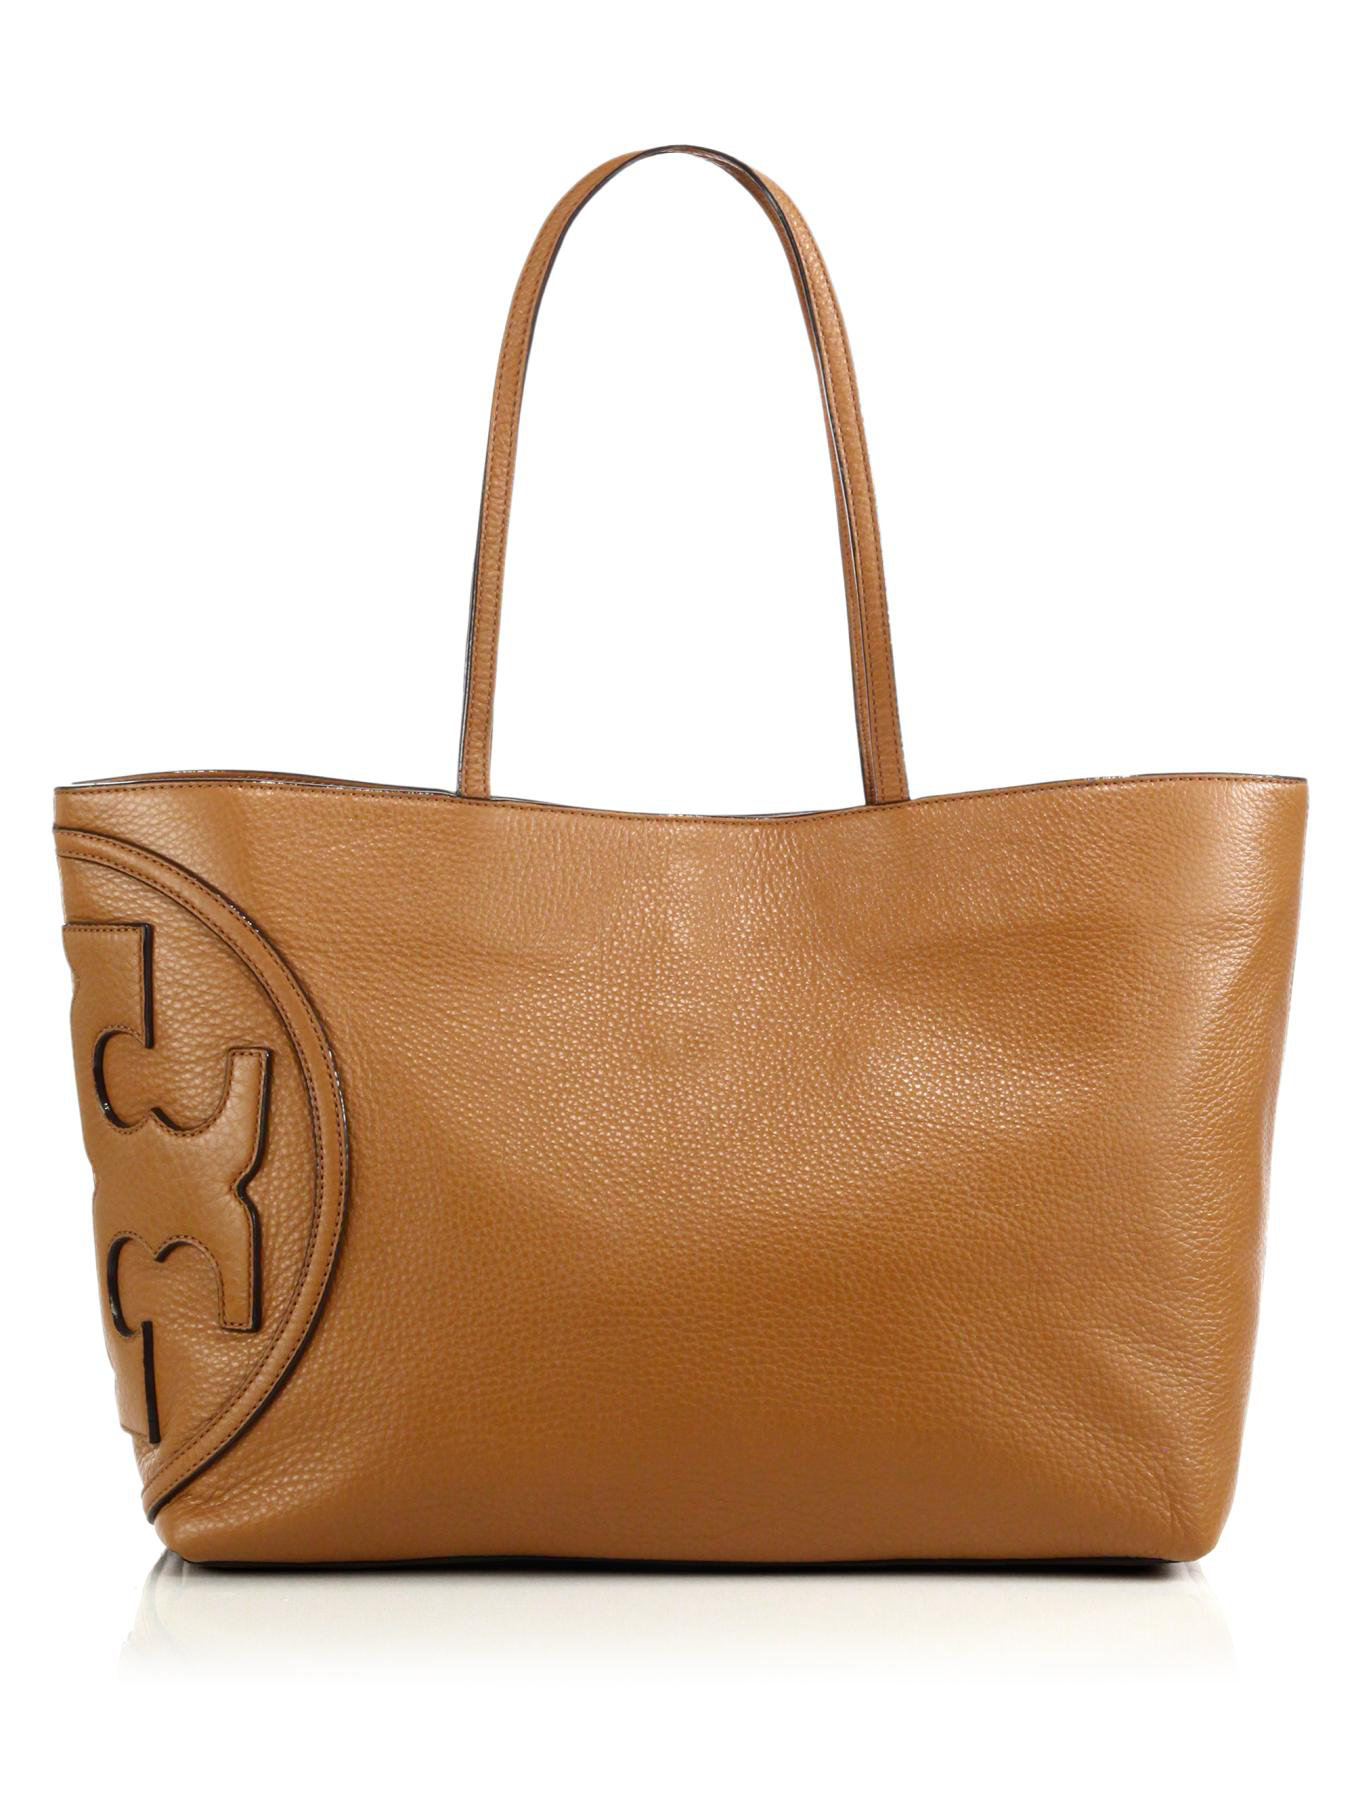 Tory Burch All-t East West Tote in Tan (Brown) - Lyst